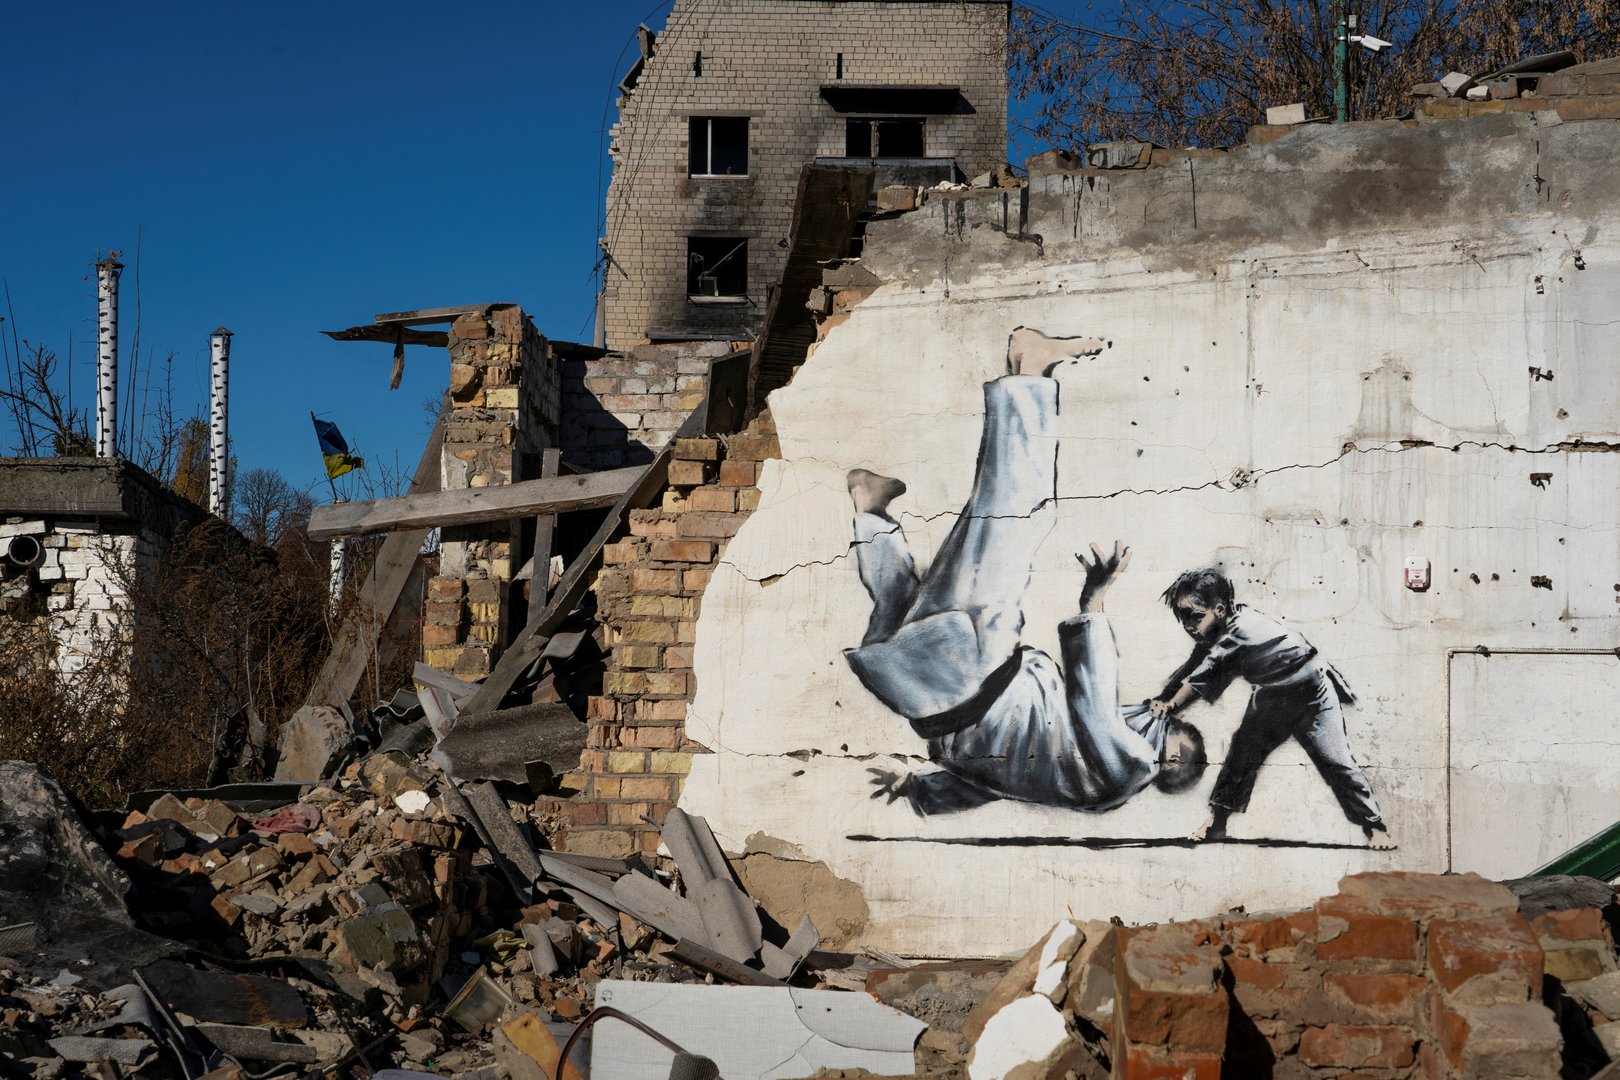 image Mastermind of Banksy removal could face years in jail, Ukraine says